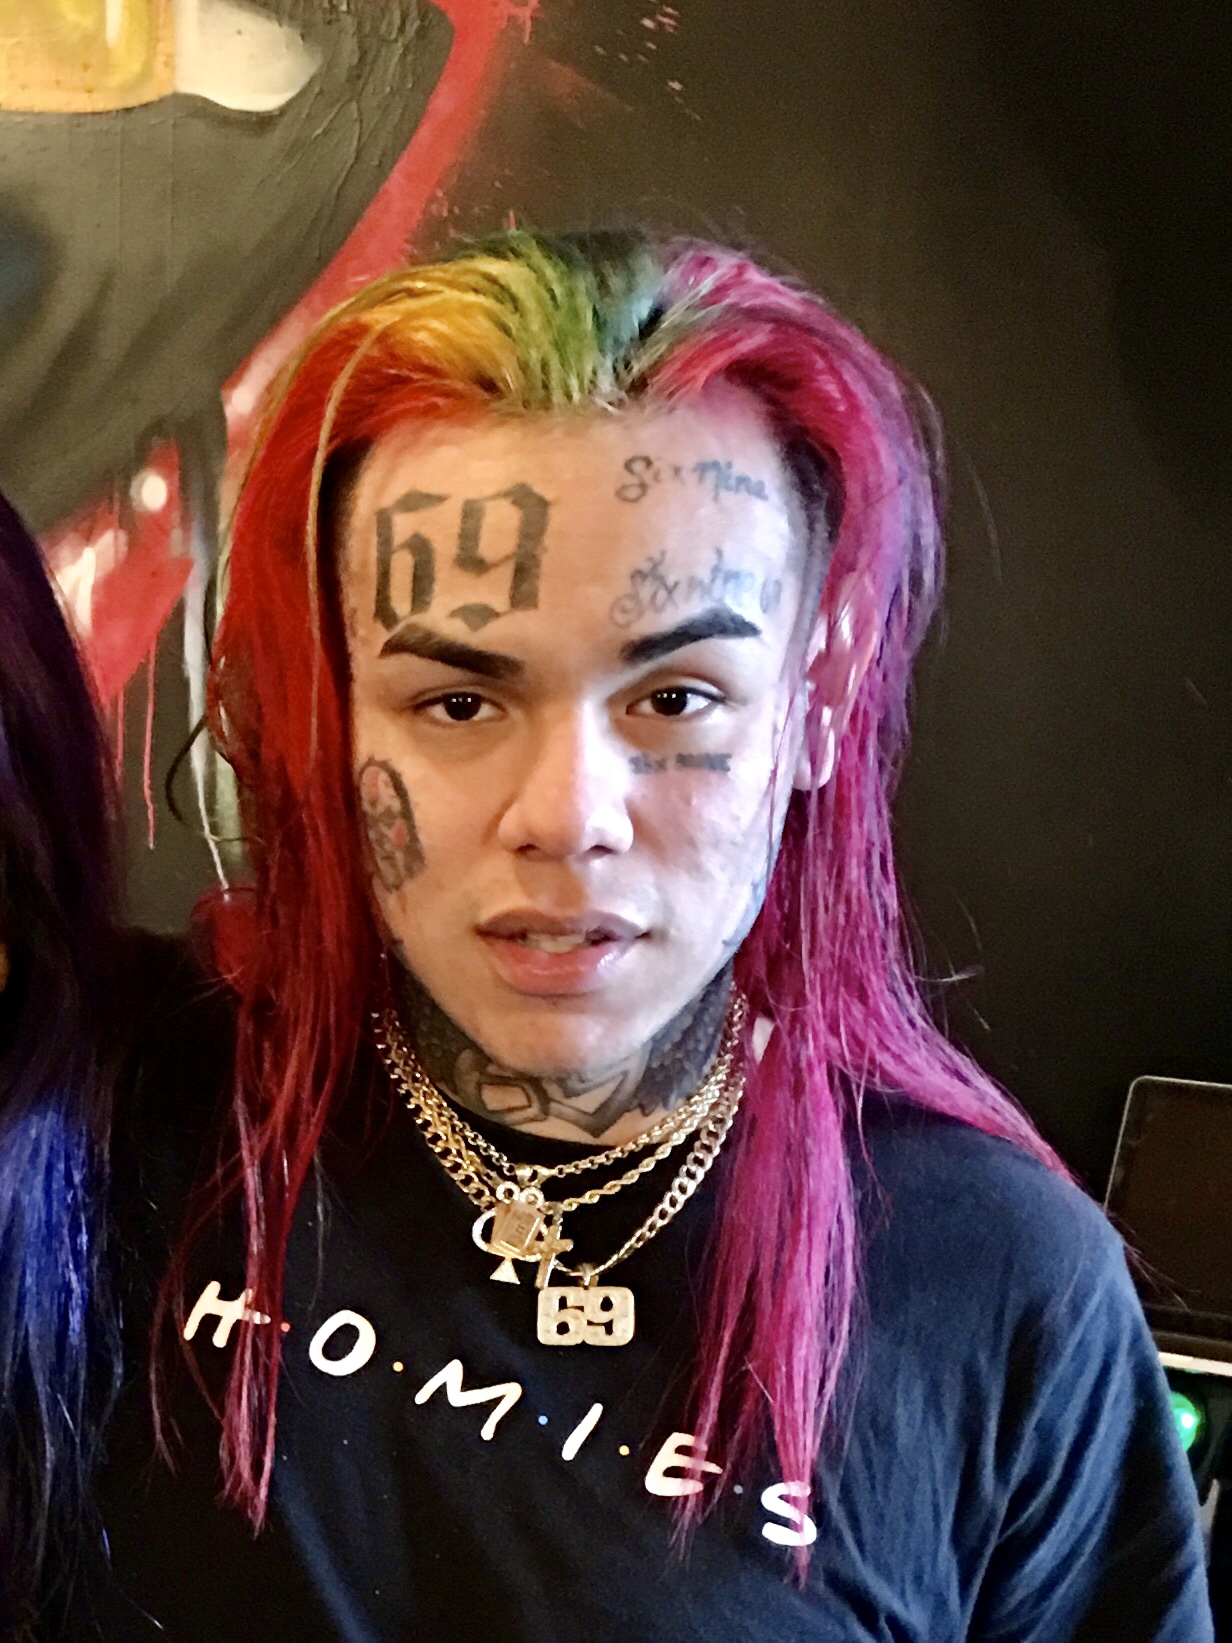 6IX9INE NET WORTH: How Rich Is The Singer Actually?